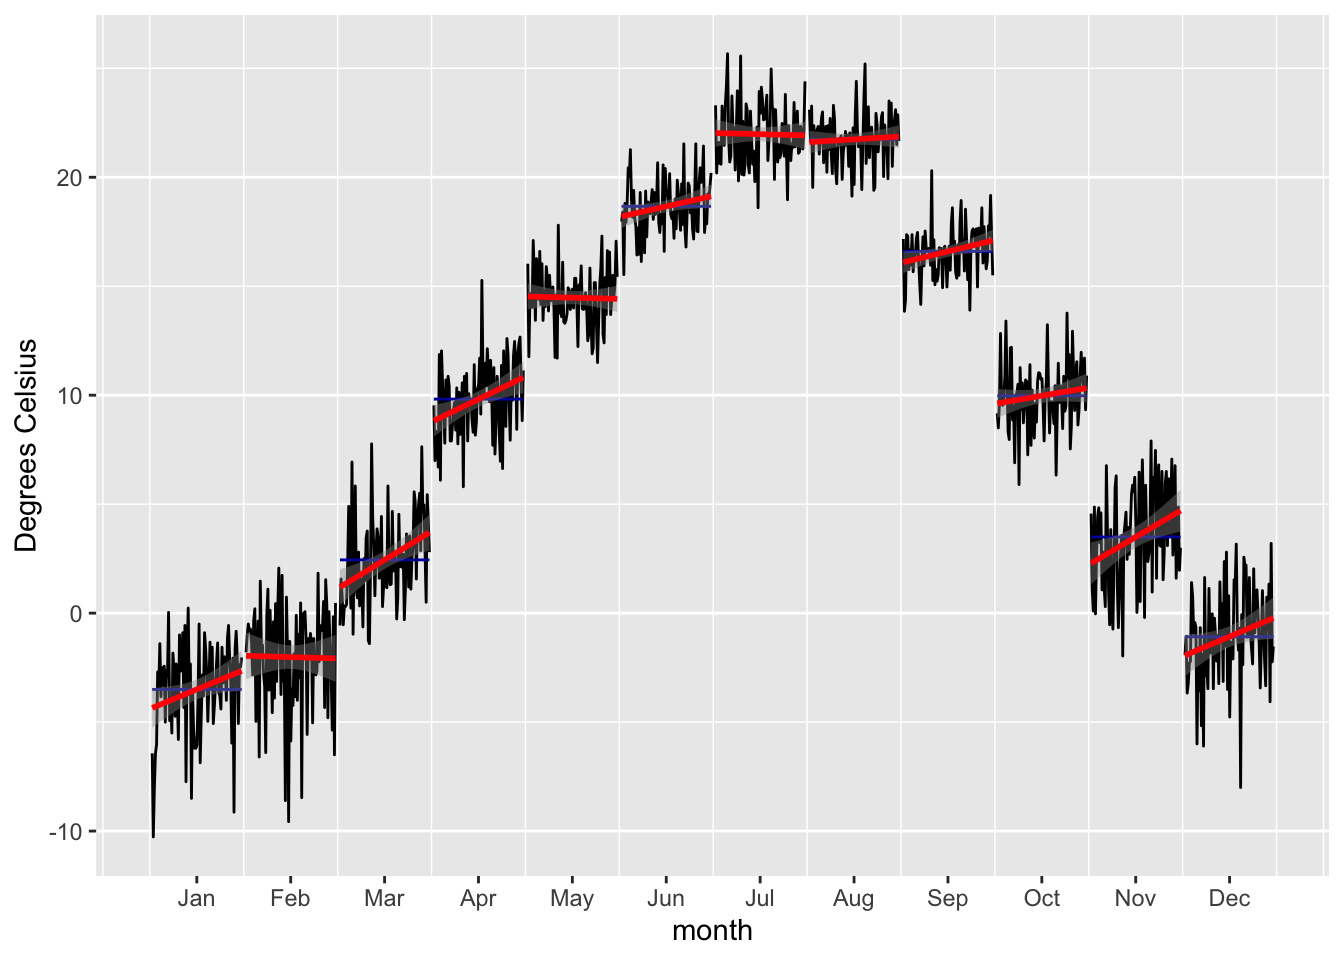 Sample development of Monthly Mean Temperatures from 1933 - 2015 at Station 38462.